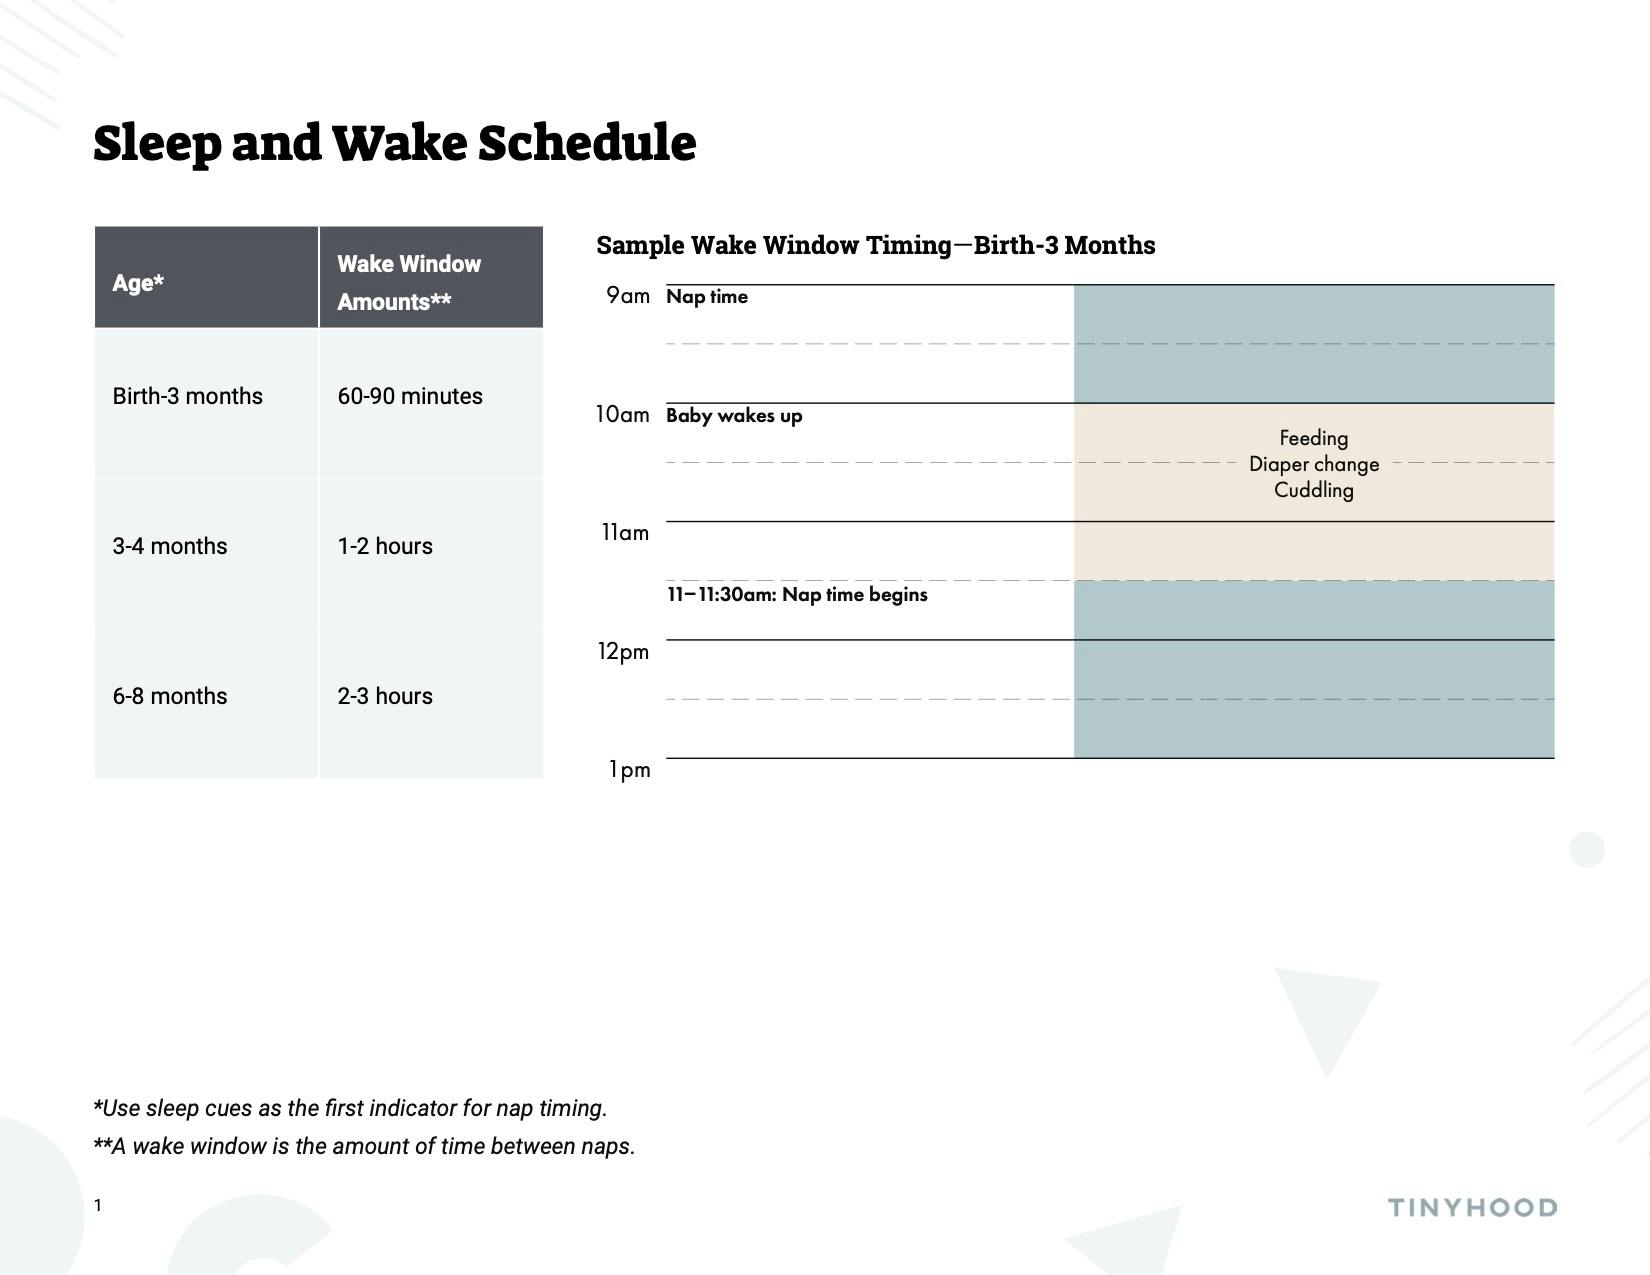 Preview image of Handout: Sleep and Wake Schedule